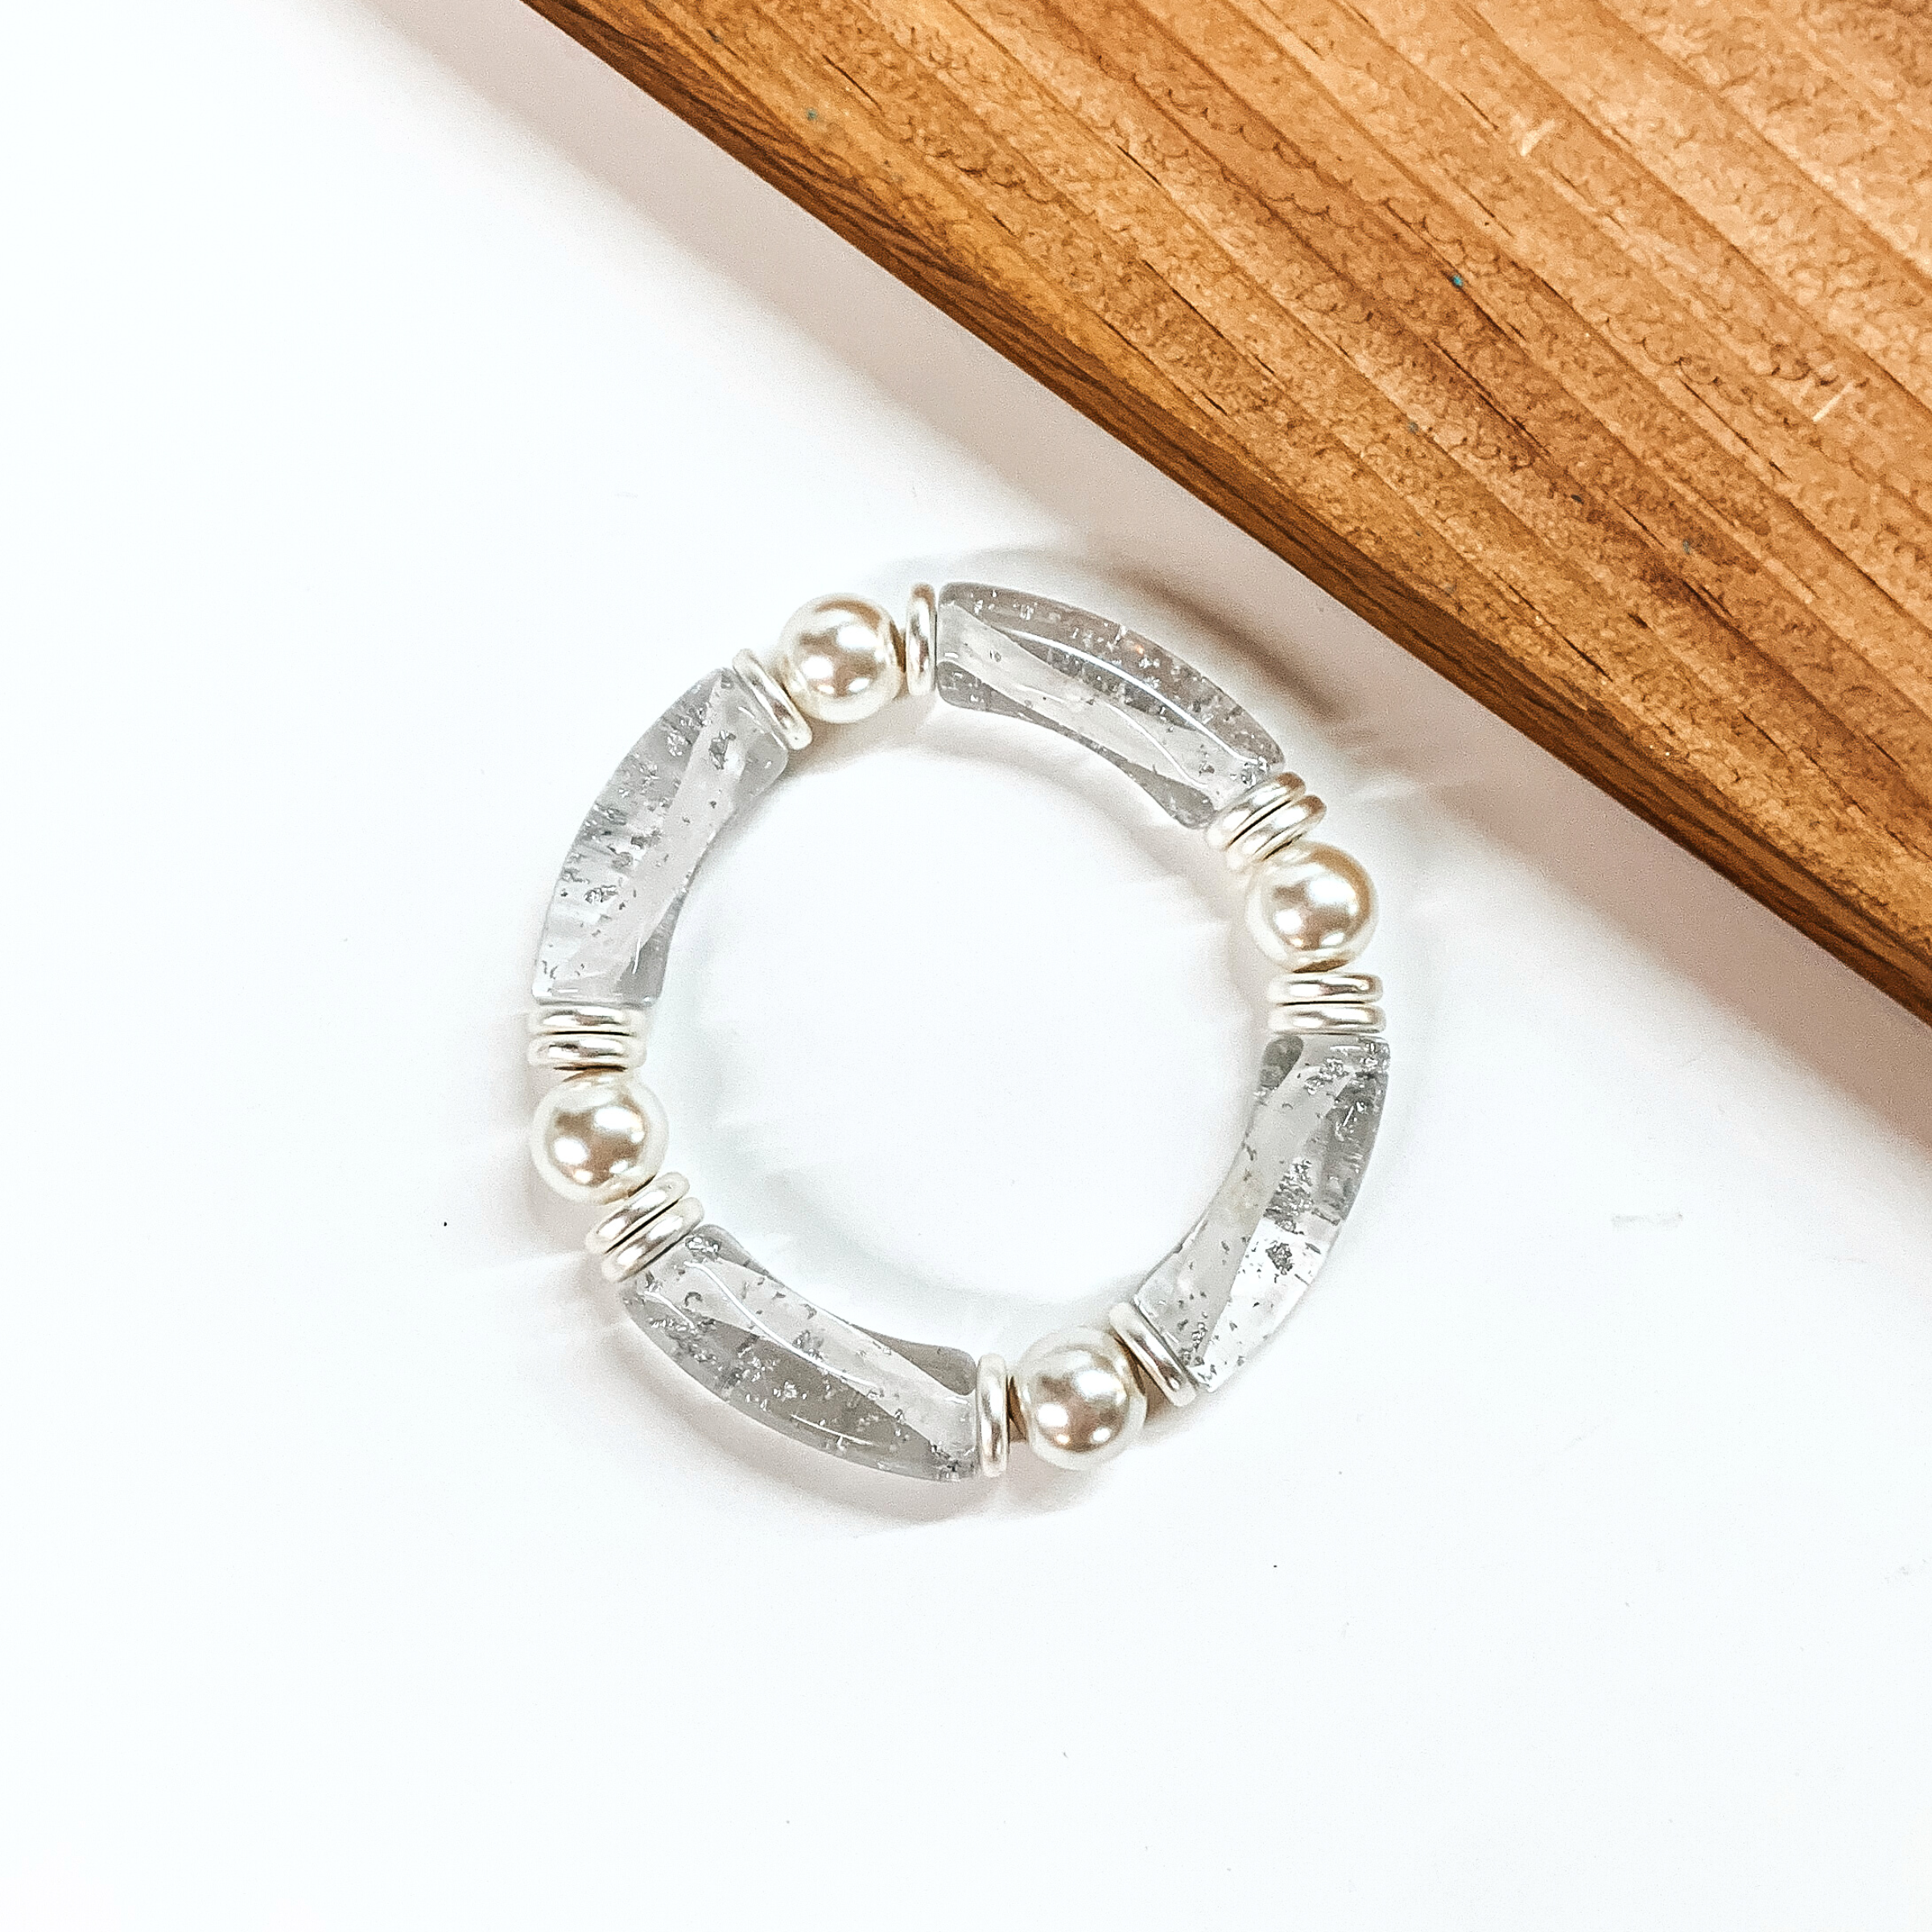 This is a clear tube bracelet with silver flakes inside. There are silver and pearl spacers. This bracelet is taken on a white background with a slab of wood in the back as decor.